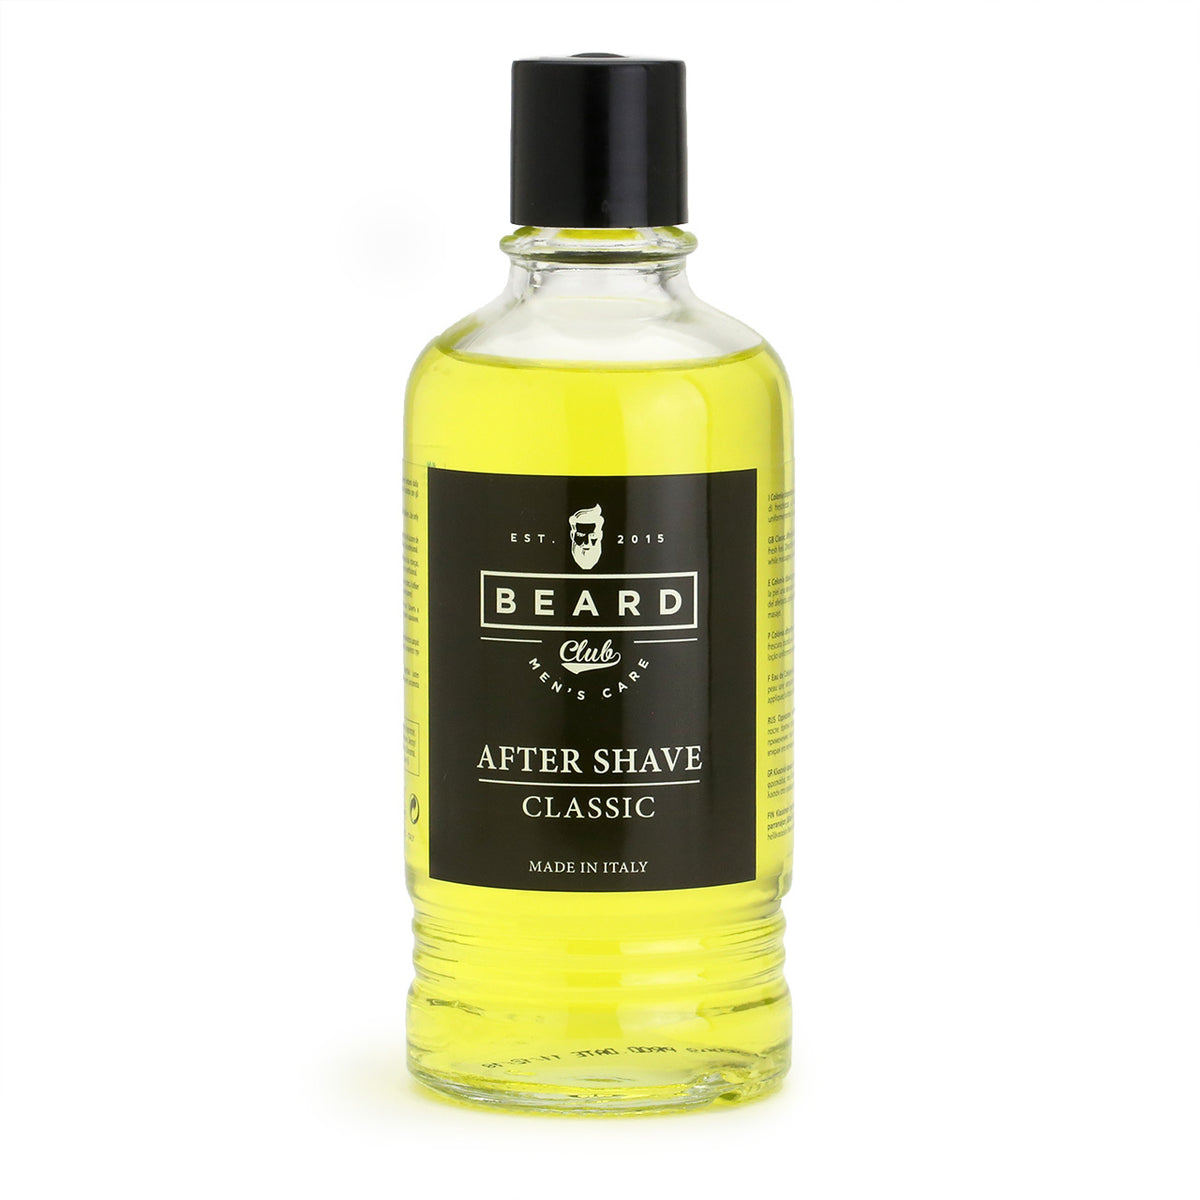 Beard Club After Shave Cologne 400ml - Classic